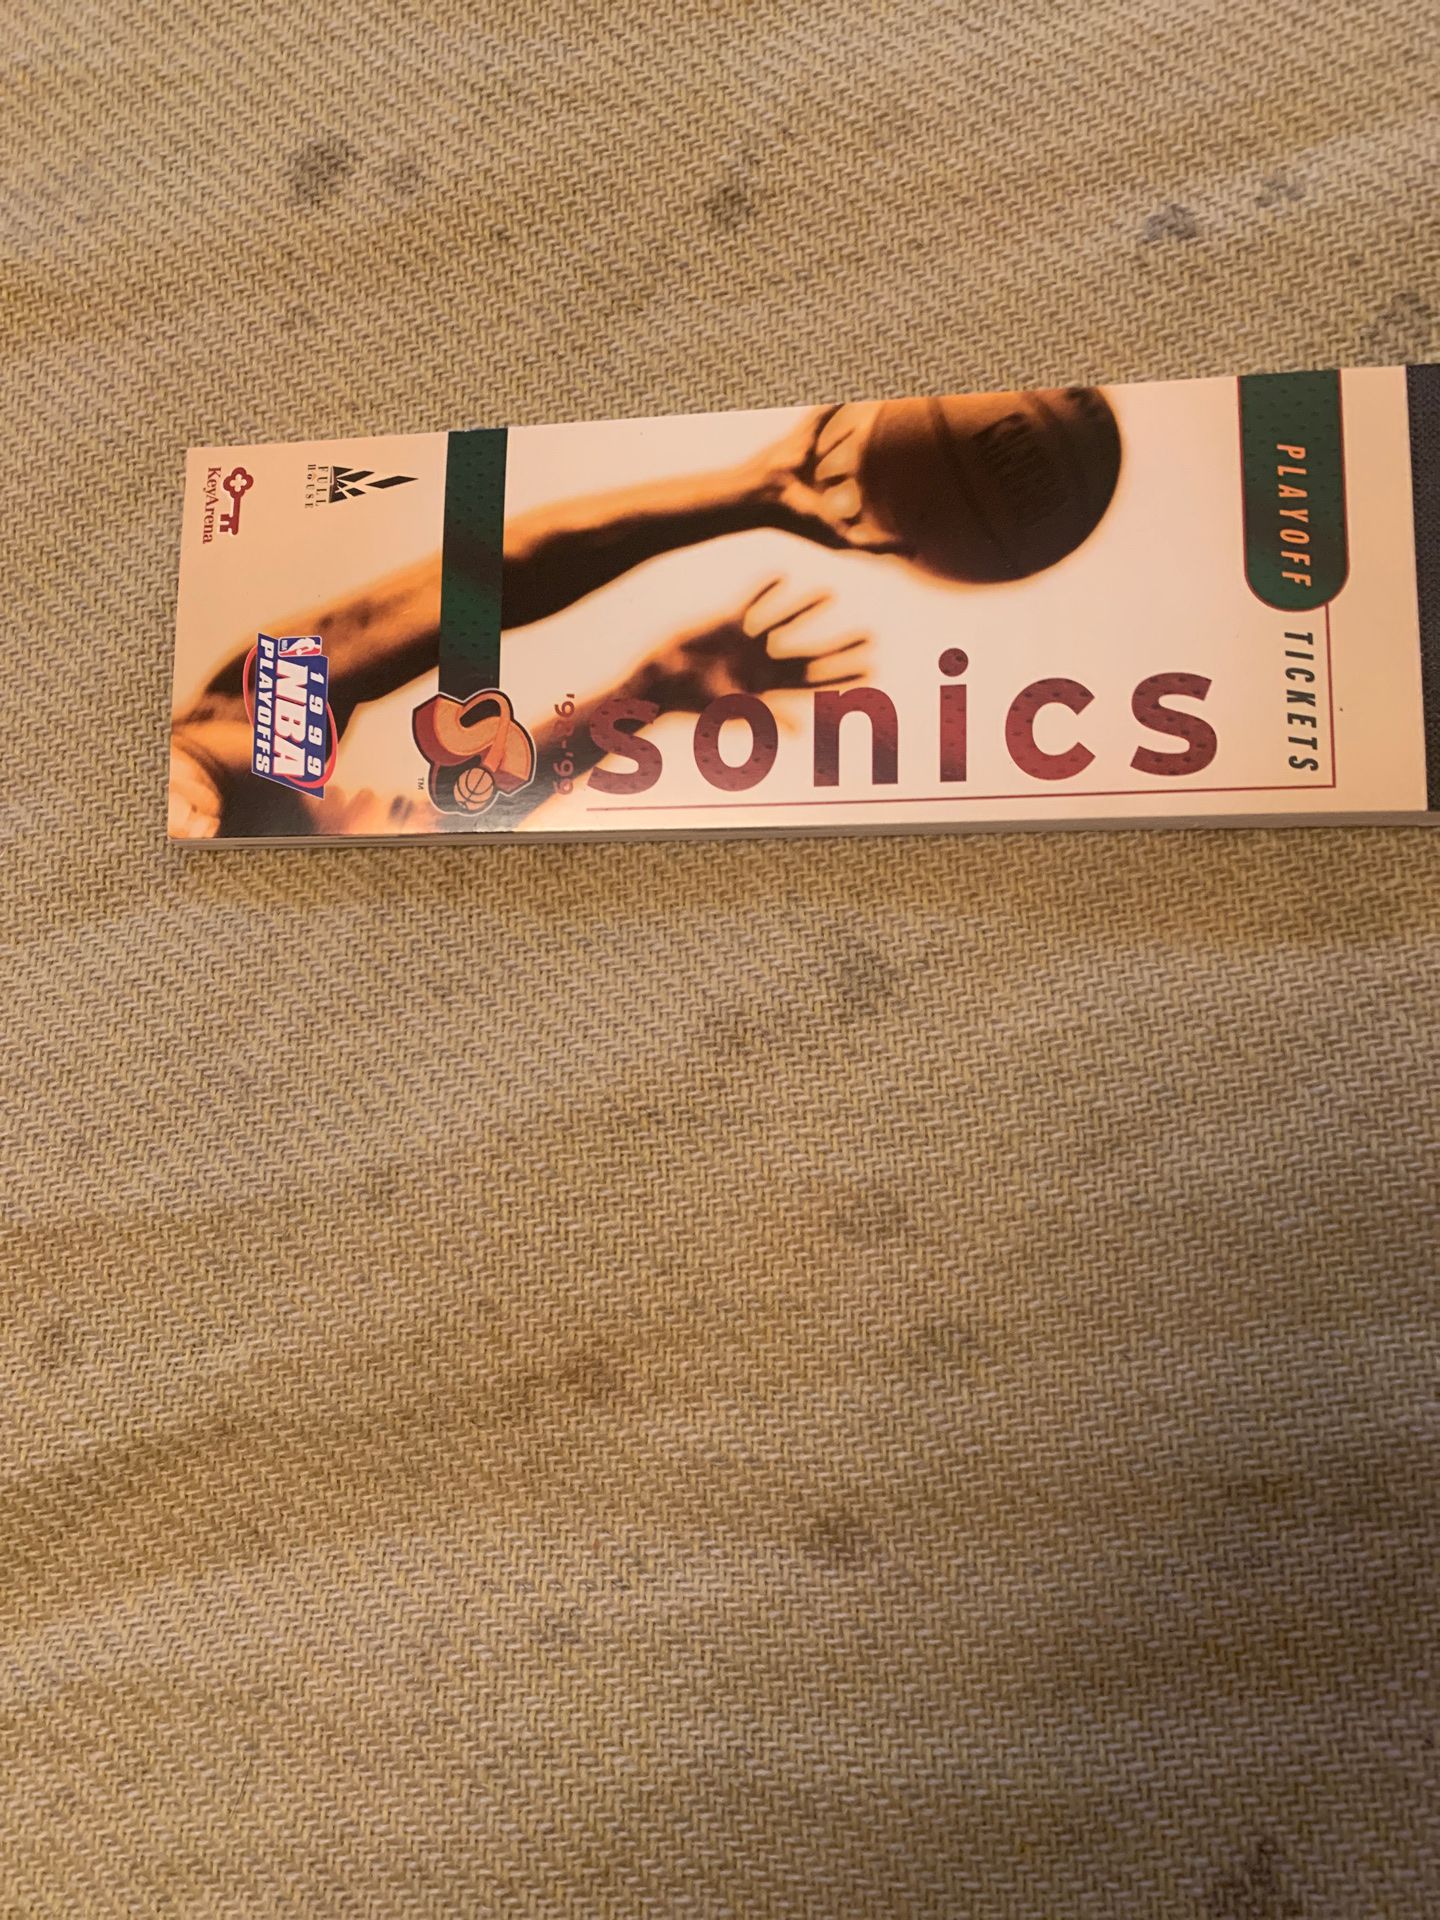 Sonics Playoff Tickets 1998-99 Full Book of 15 Tickets Never torn out of book